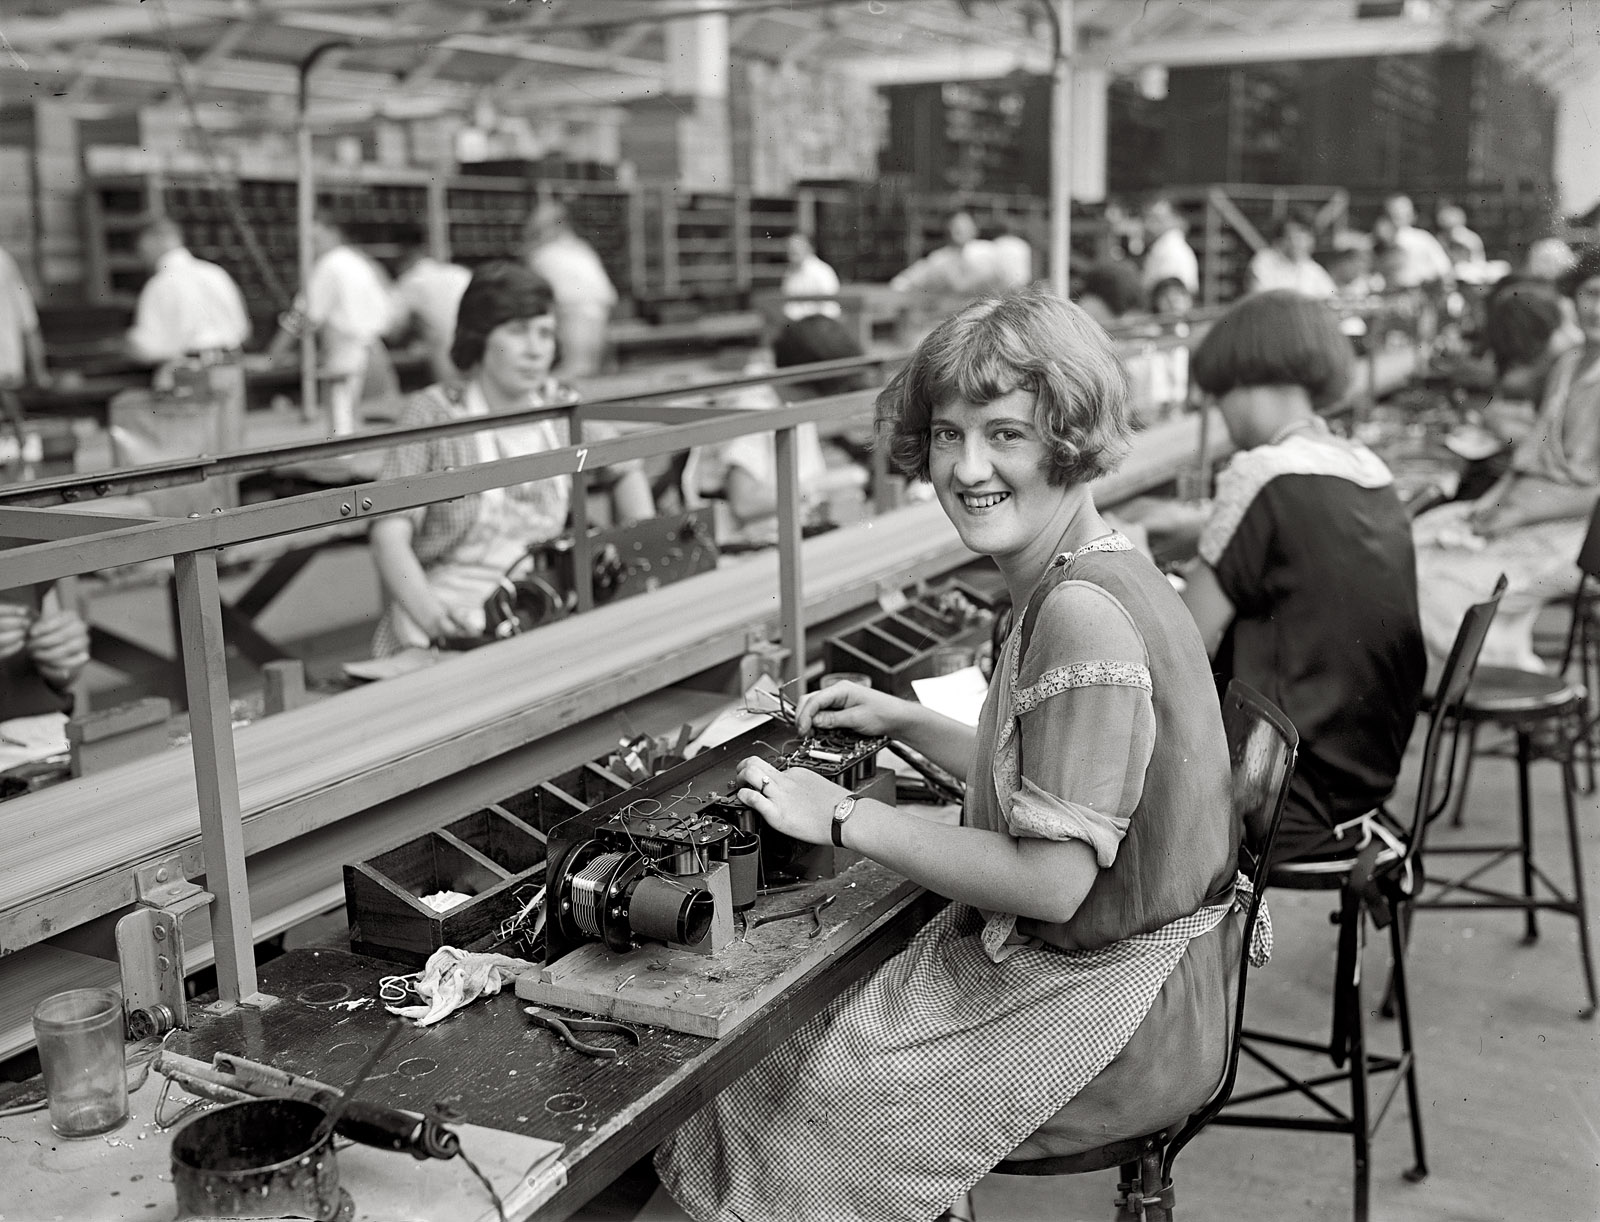 1925. "Starting assembly of set (Mary Ramsey)." A worker at the Atwater Kent radio factory in Philadelphia. National Photo glass negative. View full size.